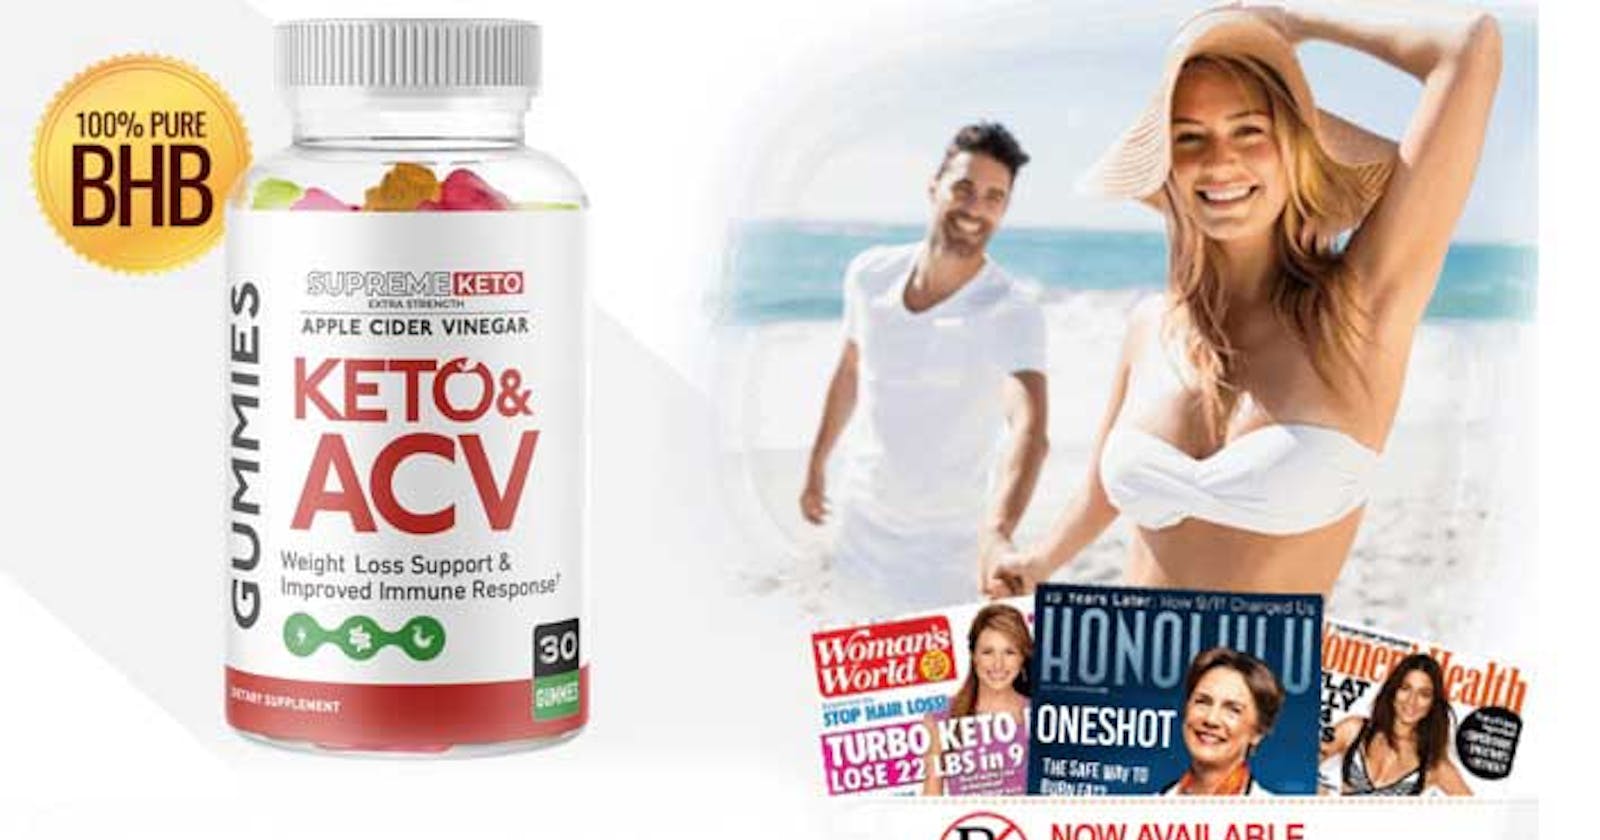 Supreme Keto ACV Gummies Canada - Better Diet Support Today!